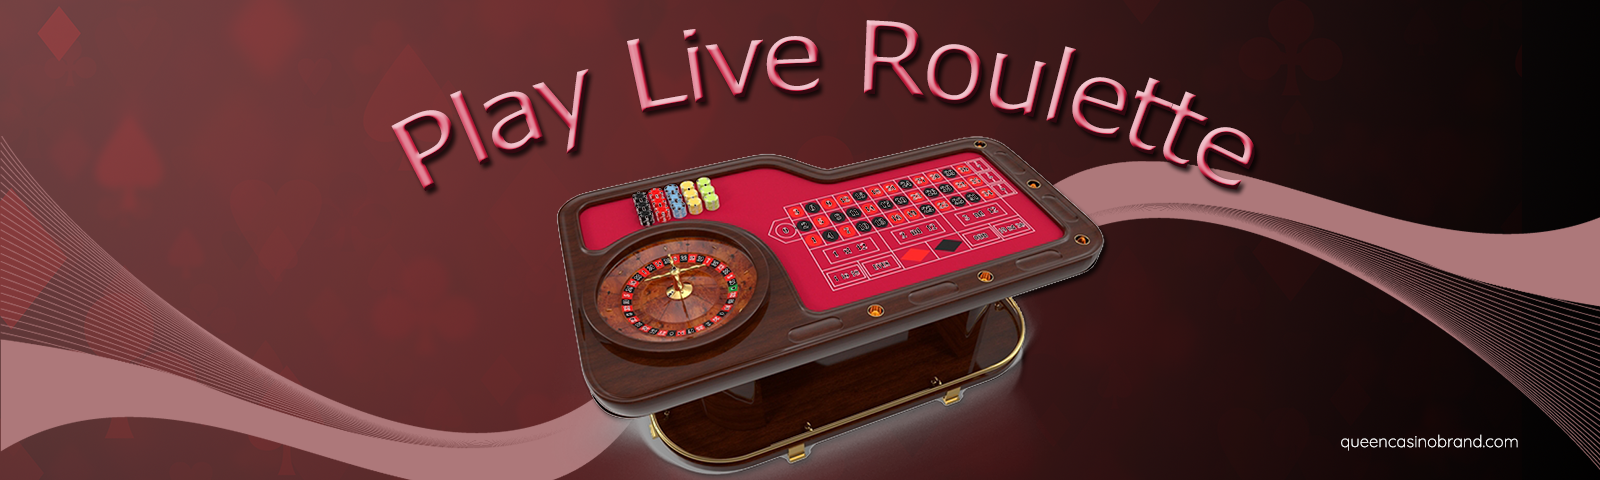 Play Live Roulette